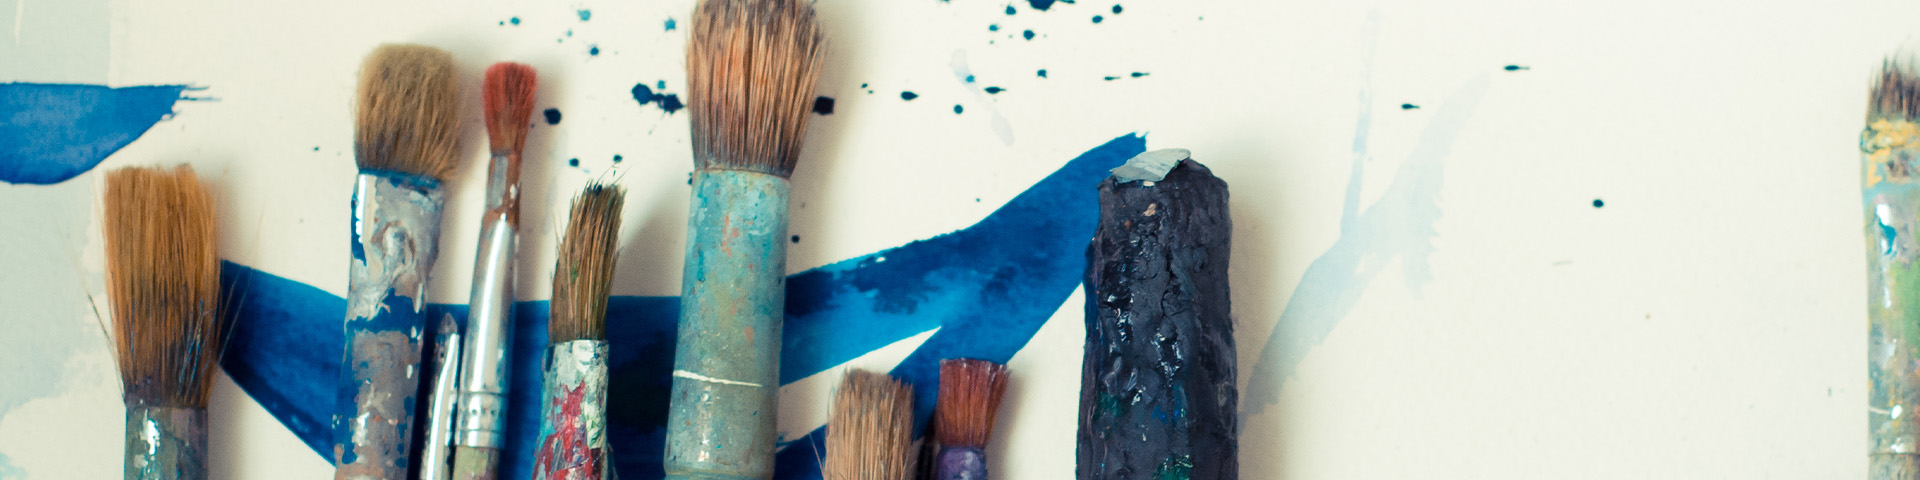 Image shows paintbrushes on a blue and white background